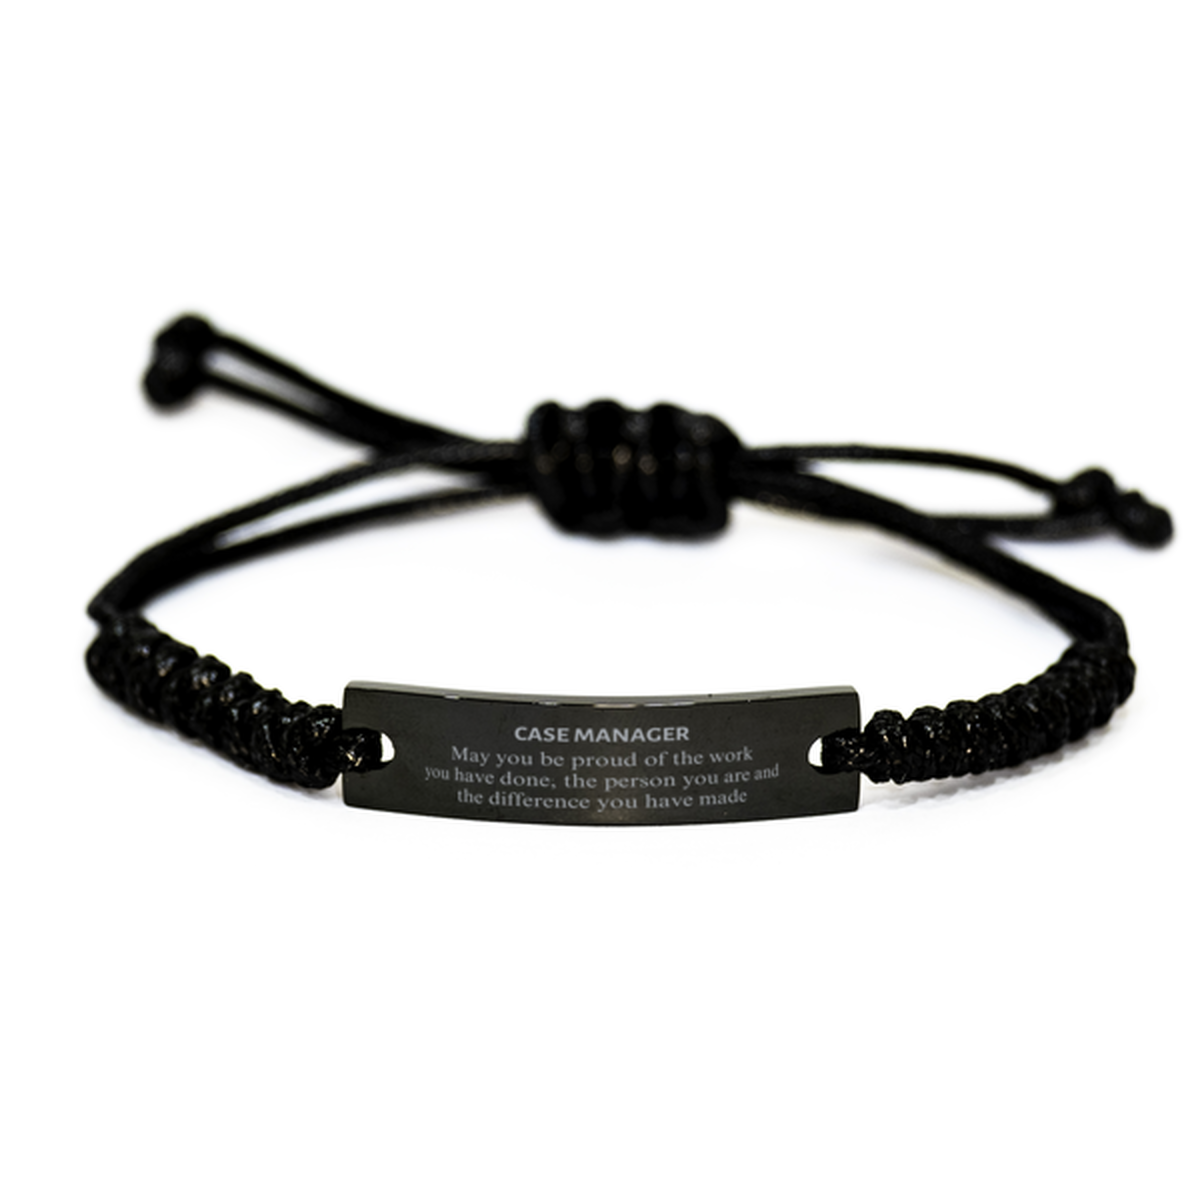 Case Manager May you be proud of the work you have done, Retirement Case Manager Black Rope Bracelet for Colleague Appreciation Gifts Amazing for Case Manager